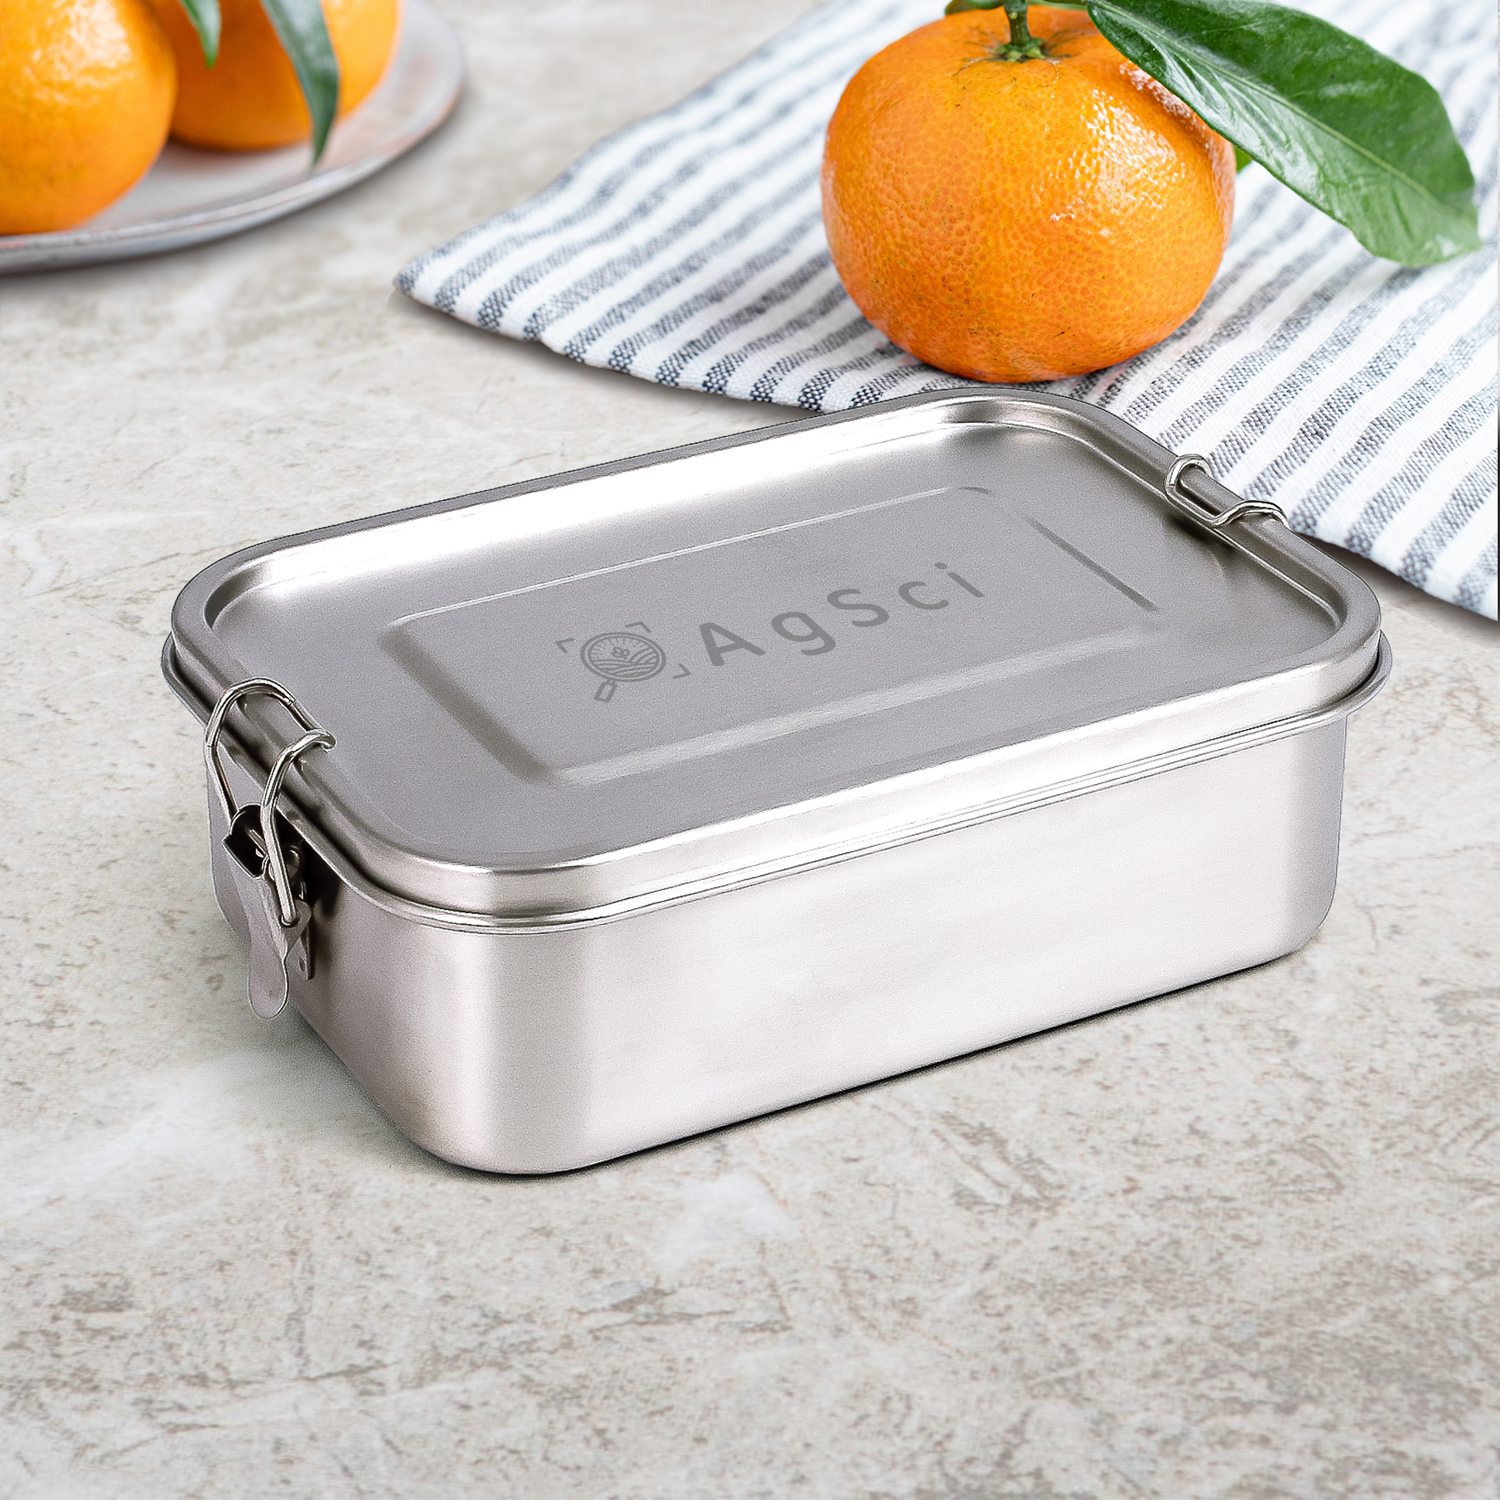 Chico Stainless Steel Lunch Box Features